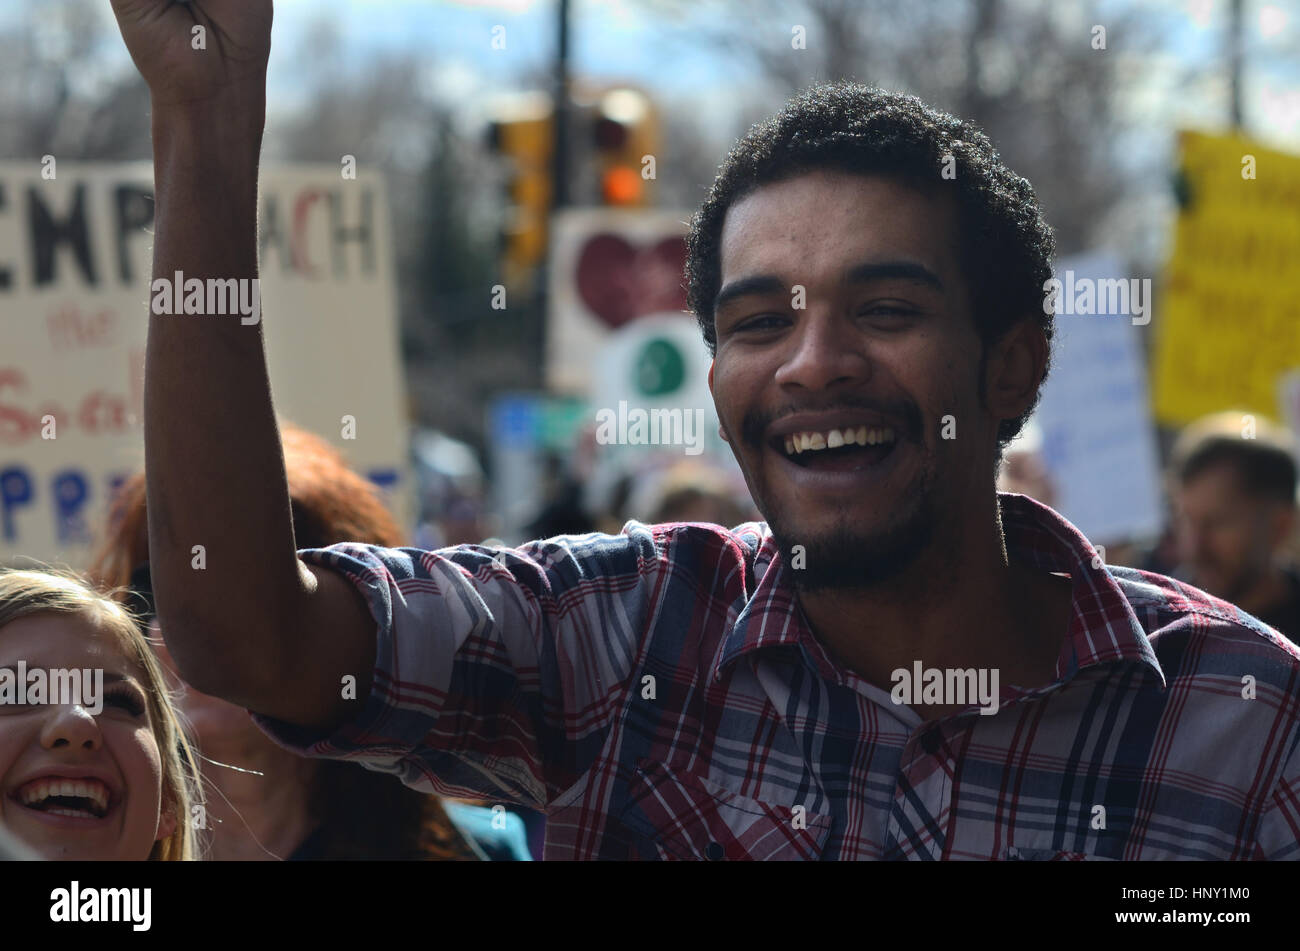 Protester at rally in Boulder, CO,  smiles during a march opposing policies the Donald Trump administration Stock Photo